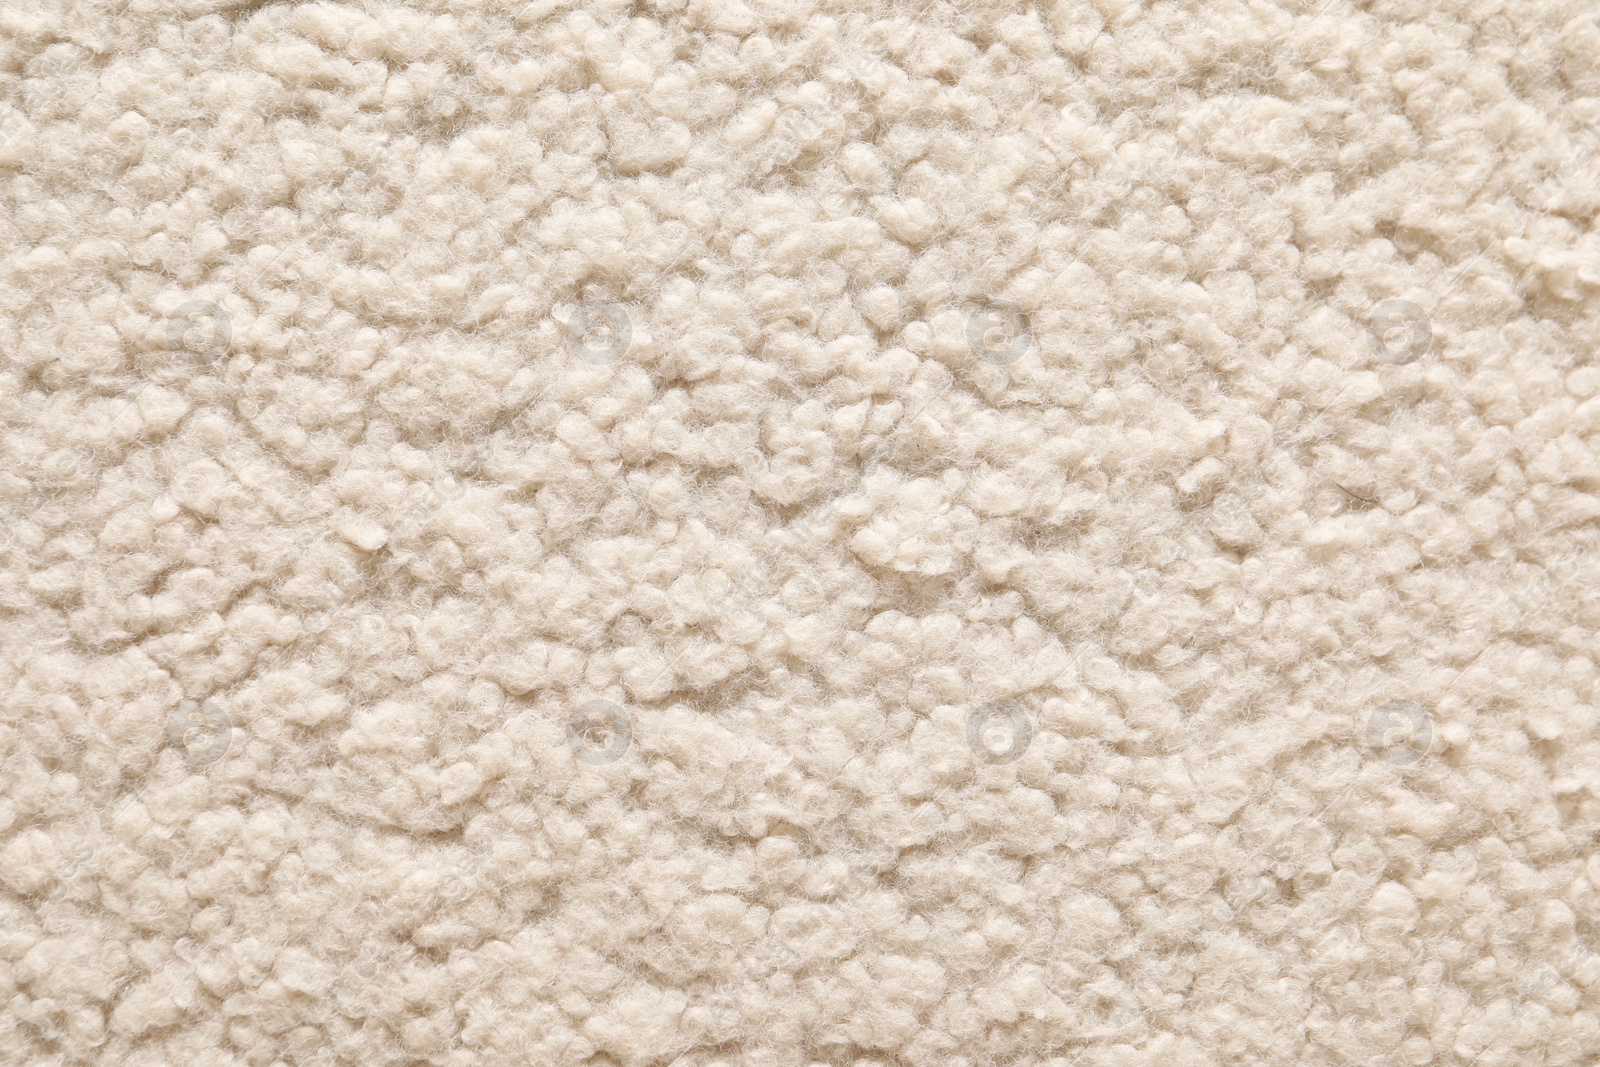 Photo of Texture of faux fur as background, top view